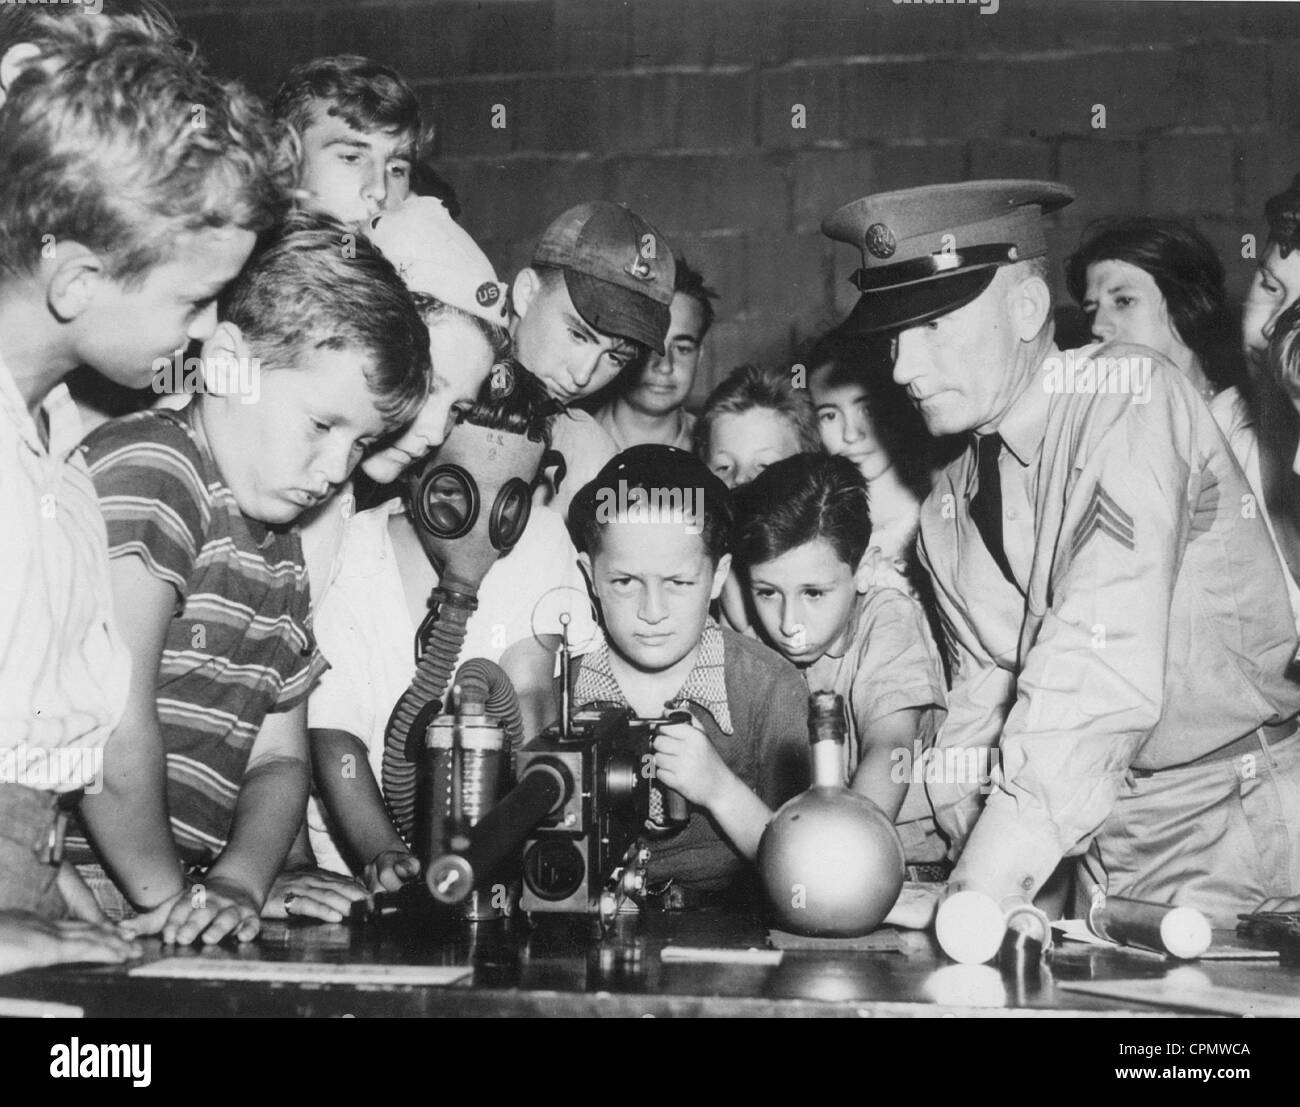 American soldier with children and teens at a presentation, 1939 Stock Photo